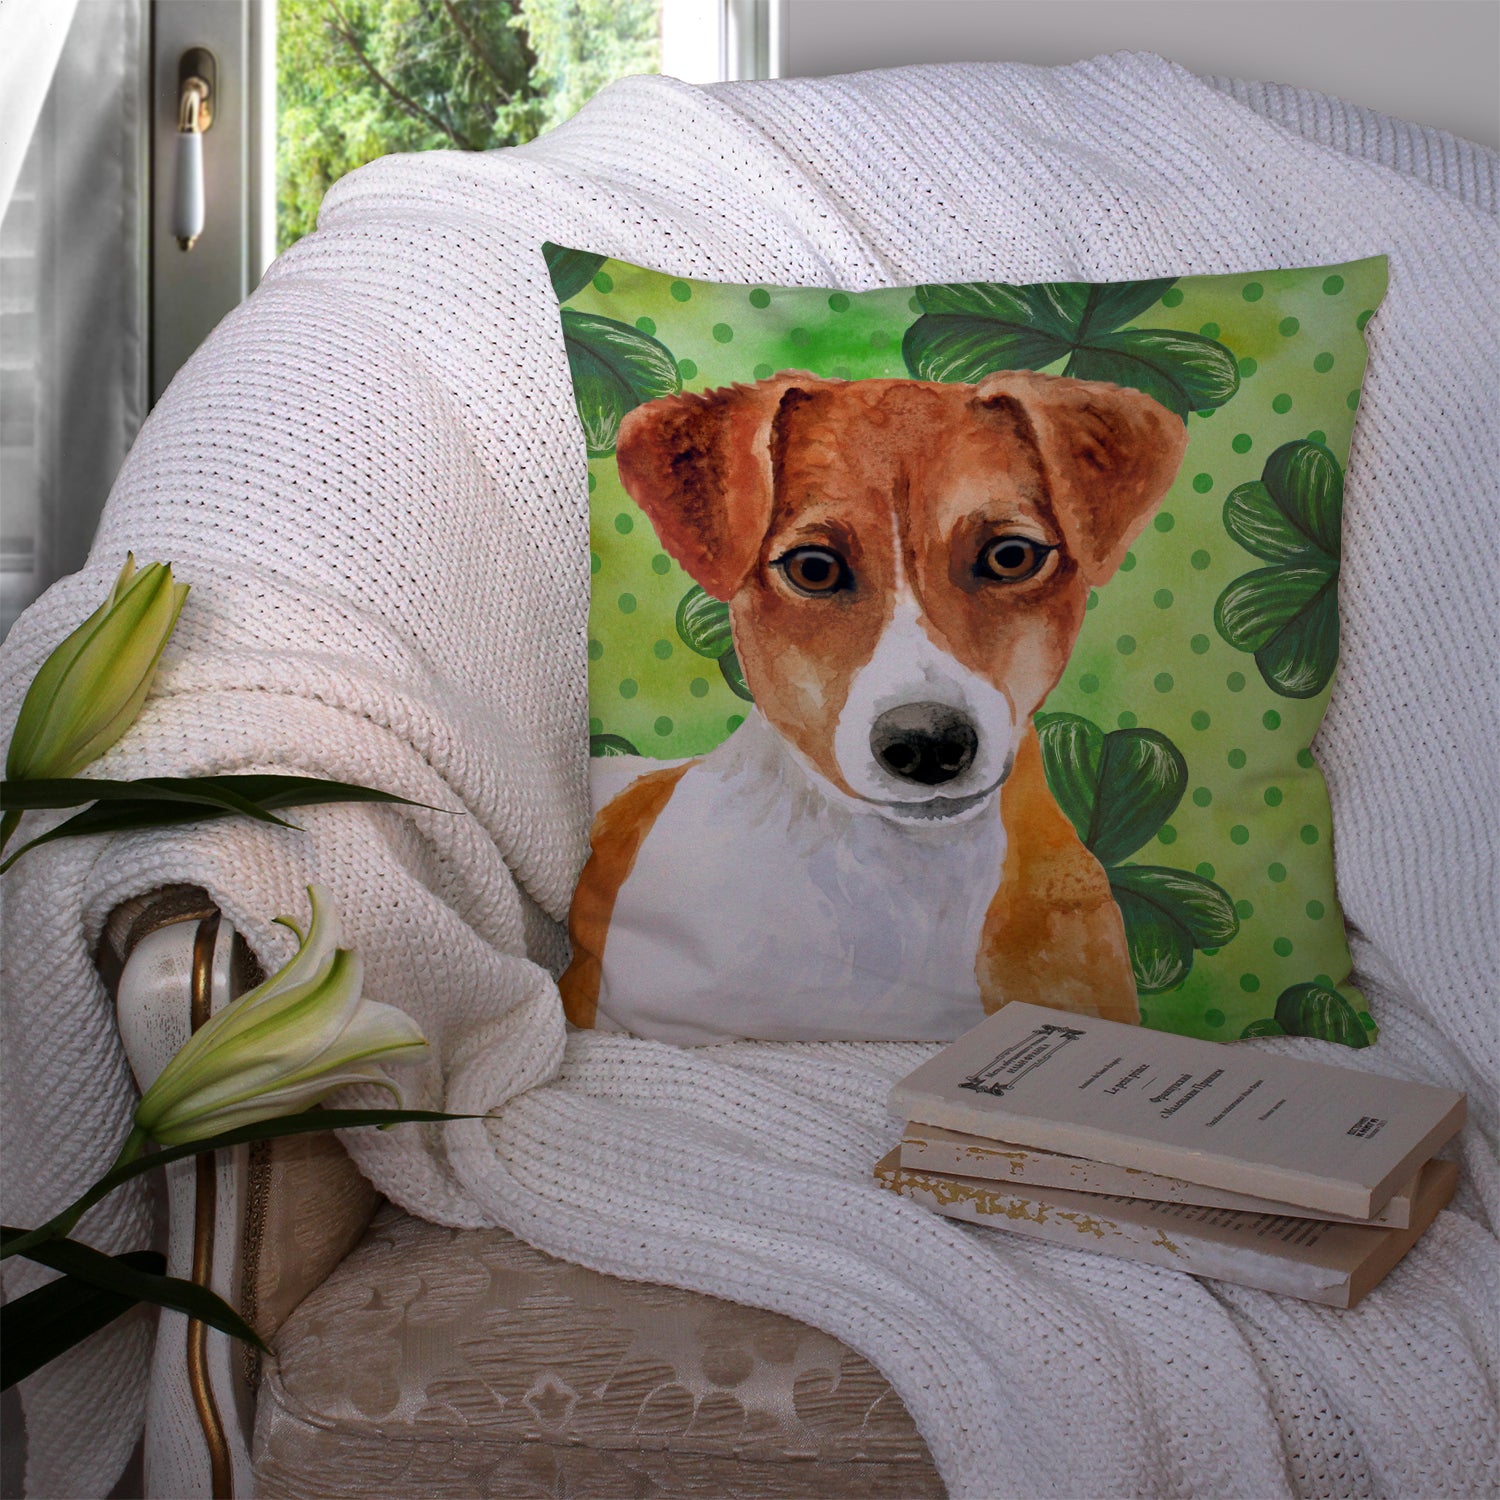 Jack Russell Terrier St Patrick's Fabric Decorative Pillow BB9863PW1414 - the-store.com